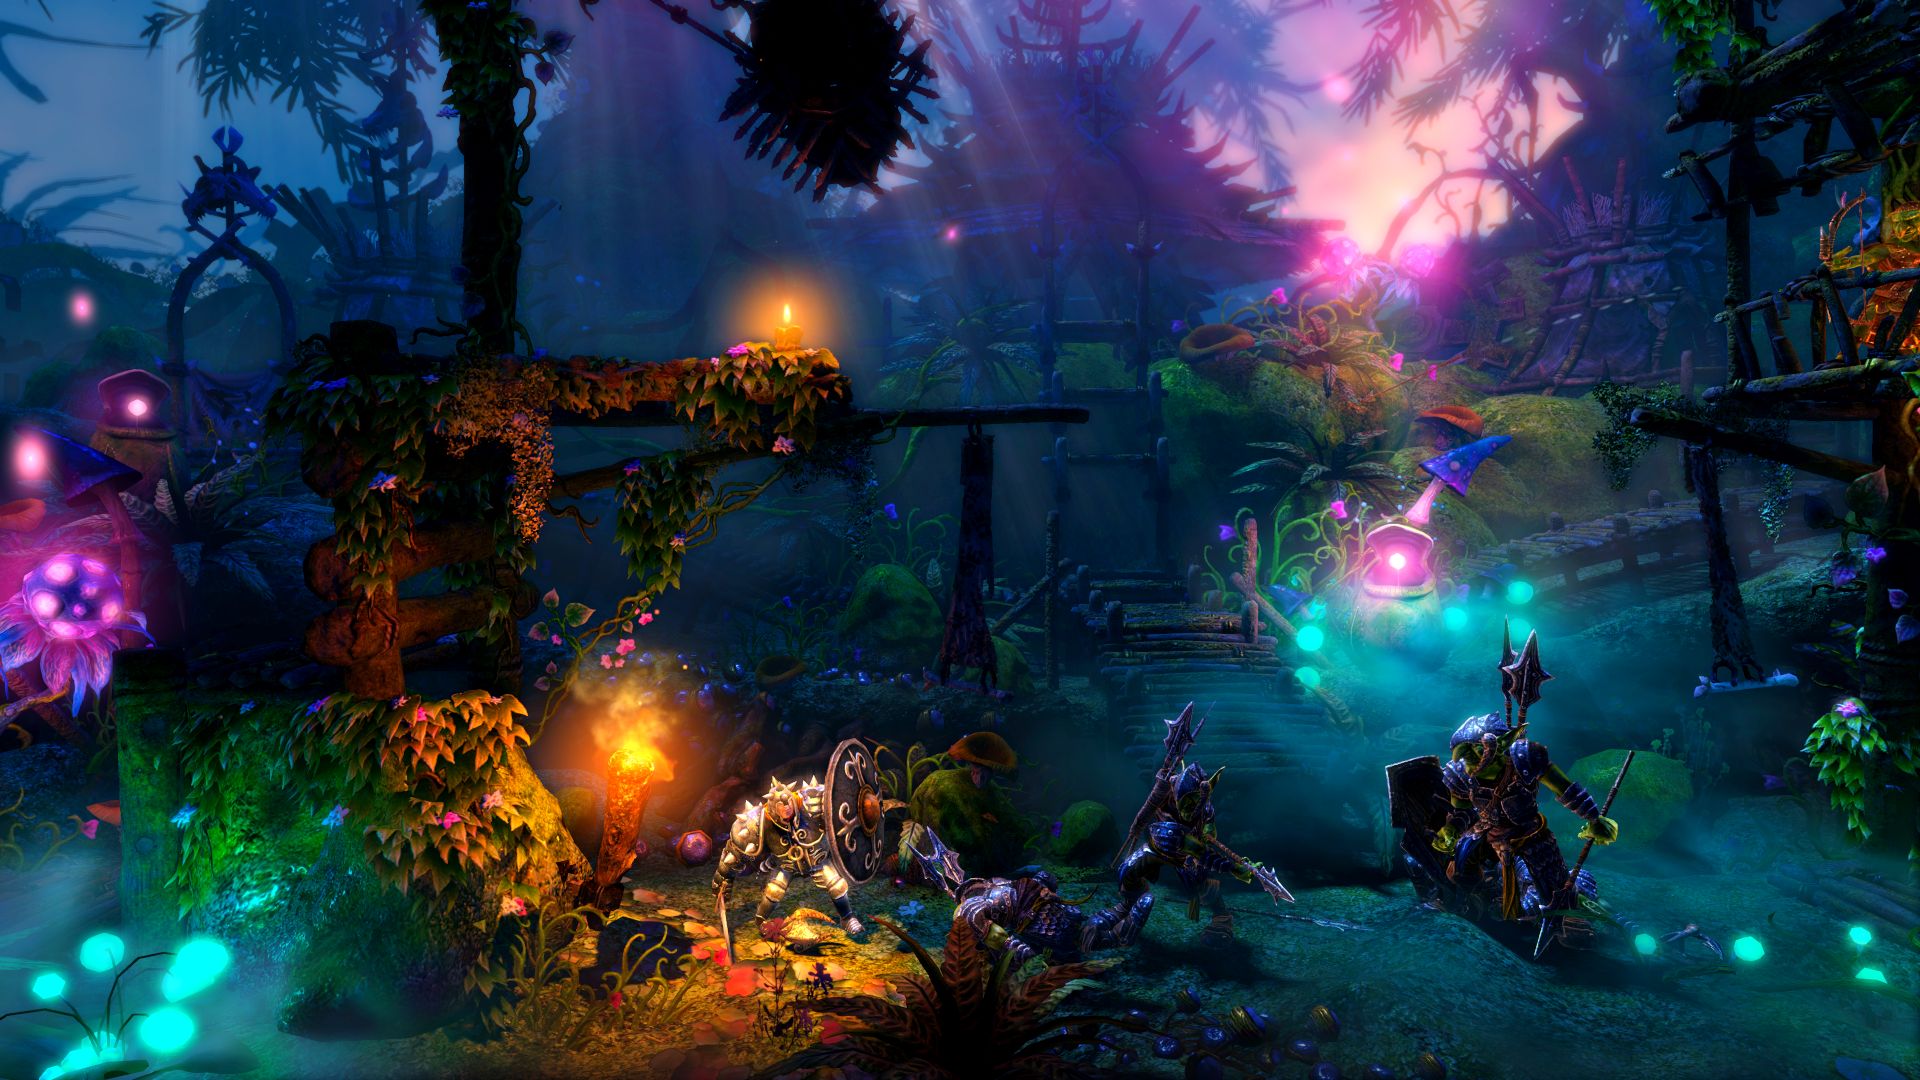 free download trine 2 complete story